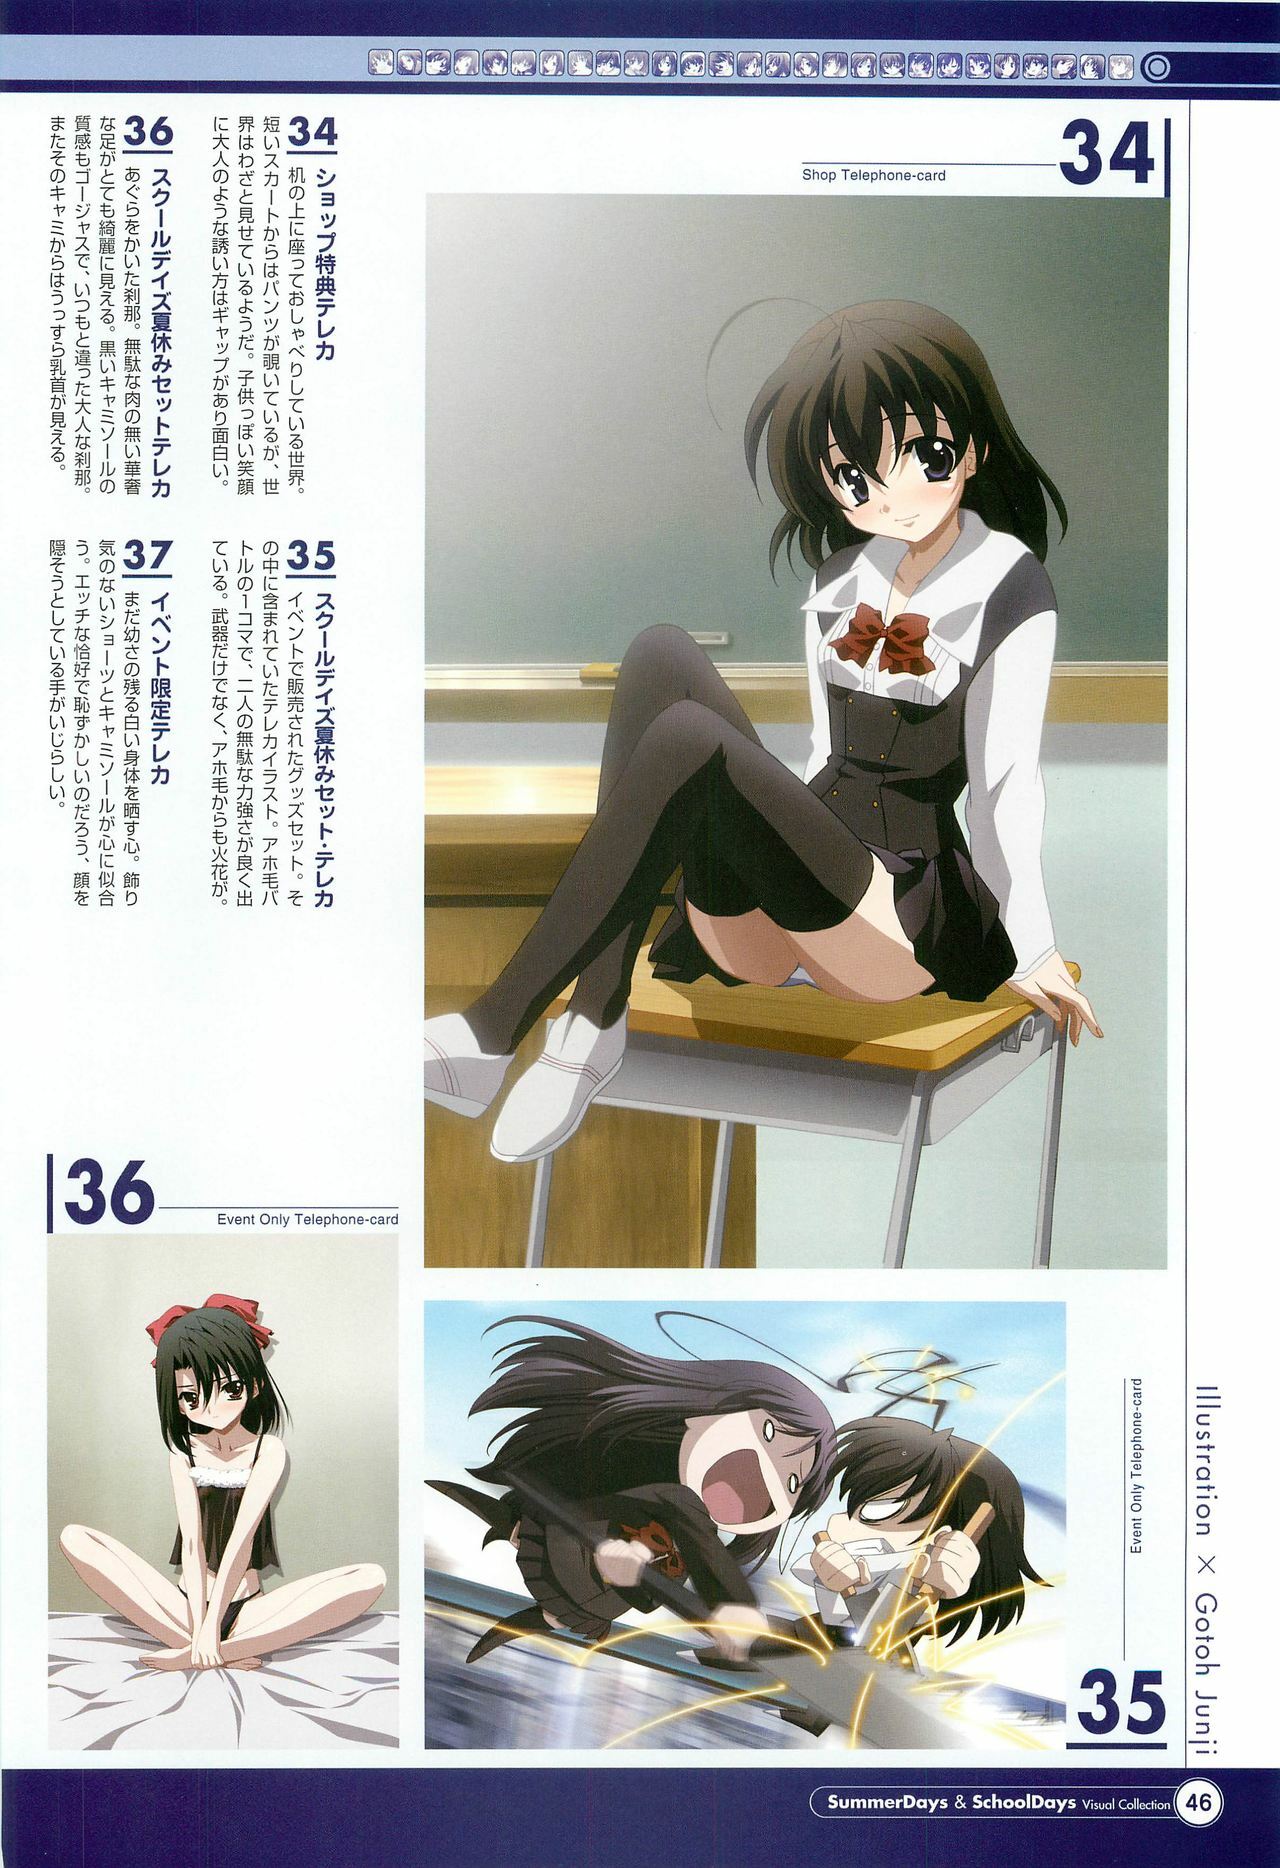 SummerDays & School Days Visual Collection page 48 full